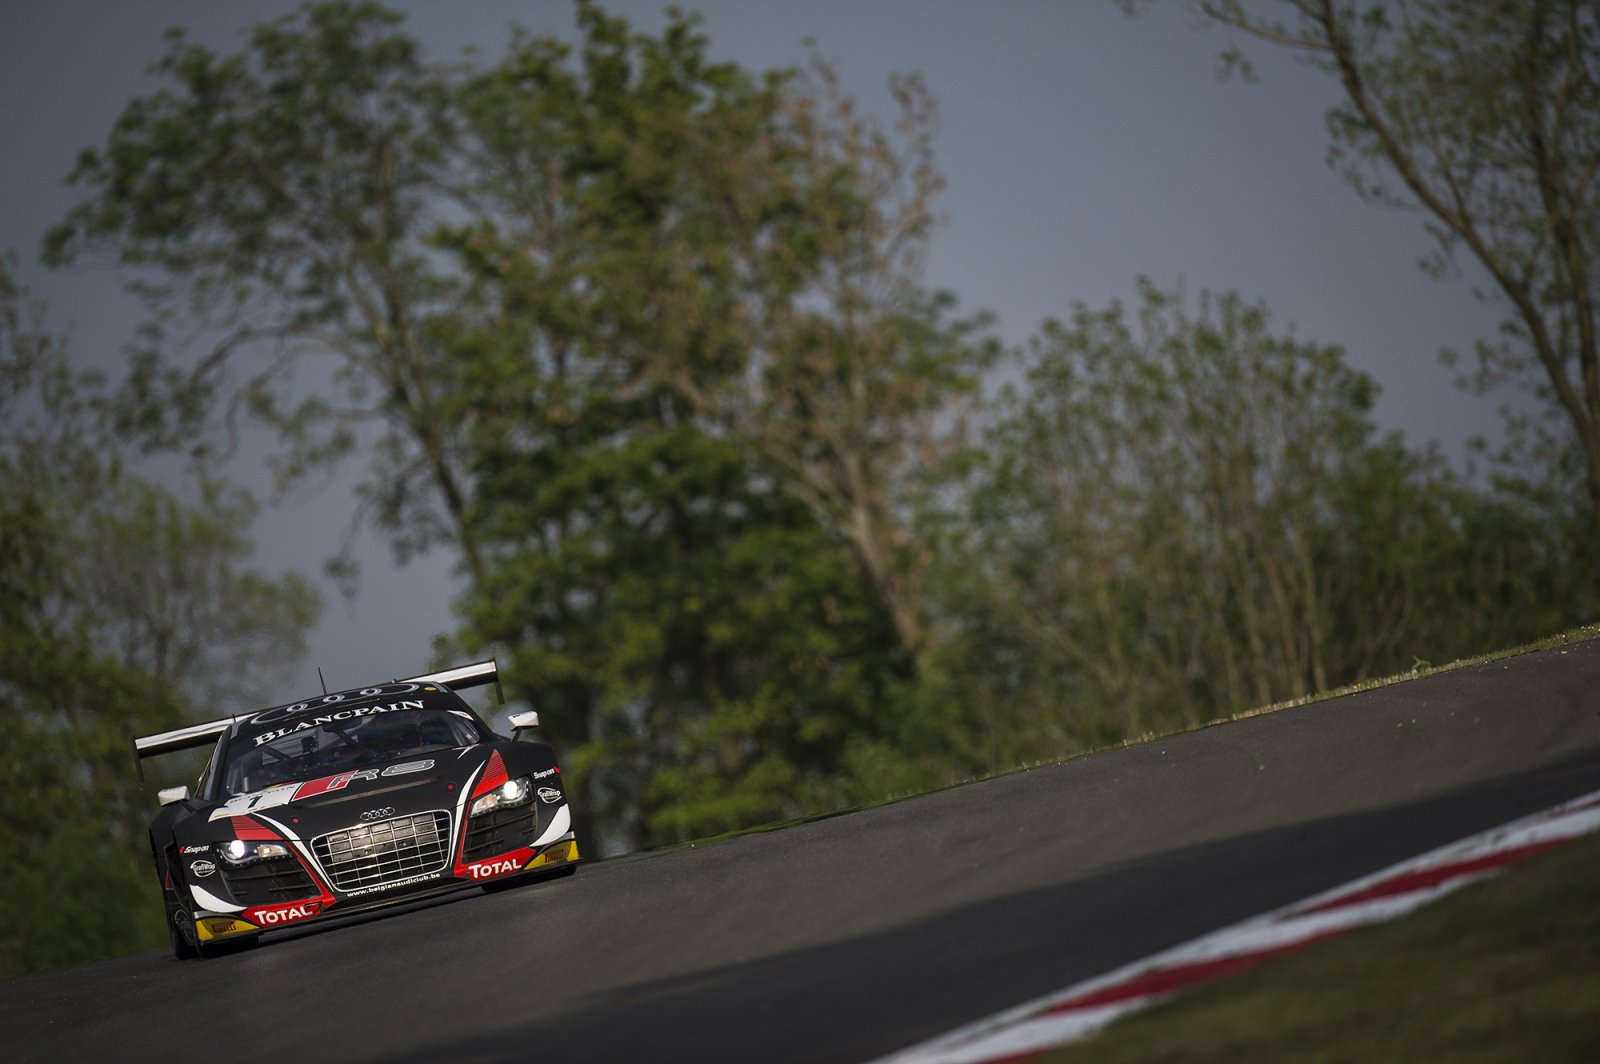 Laurens Vanthoor takes pole after thrilling qualifying session